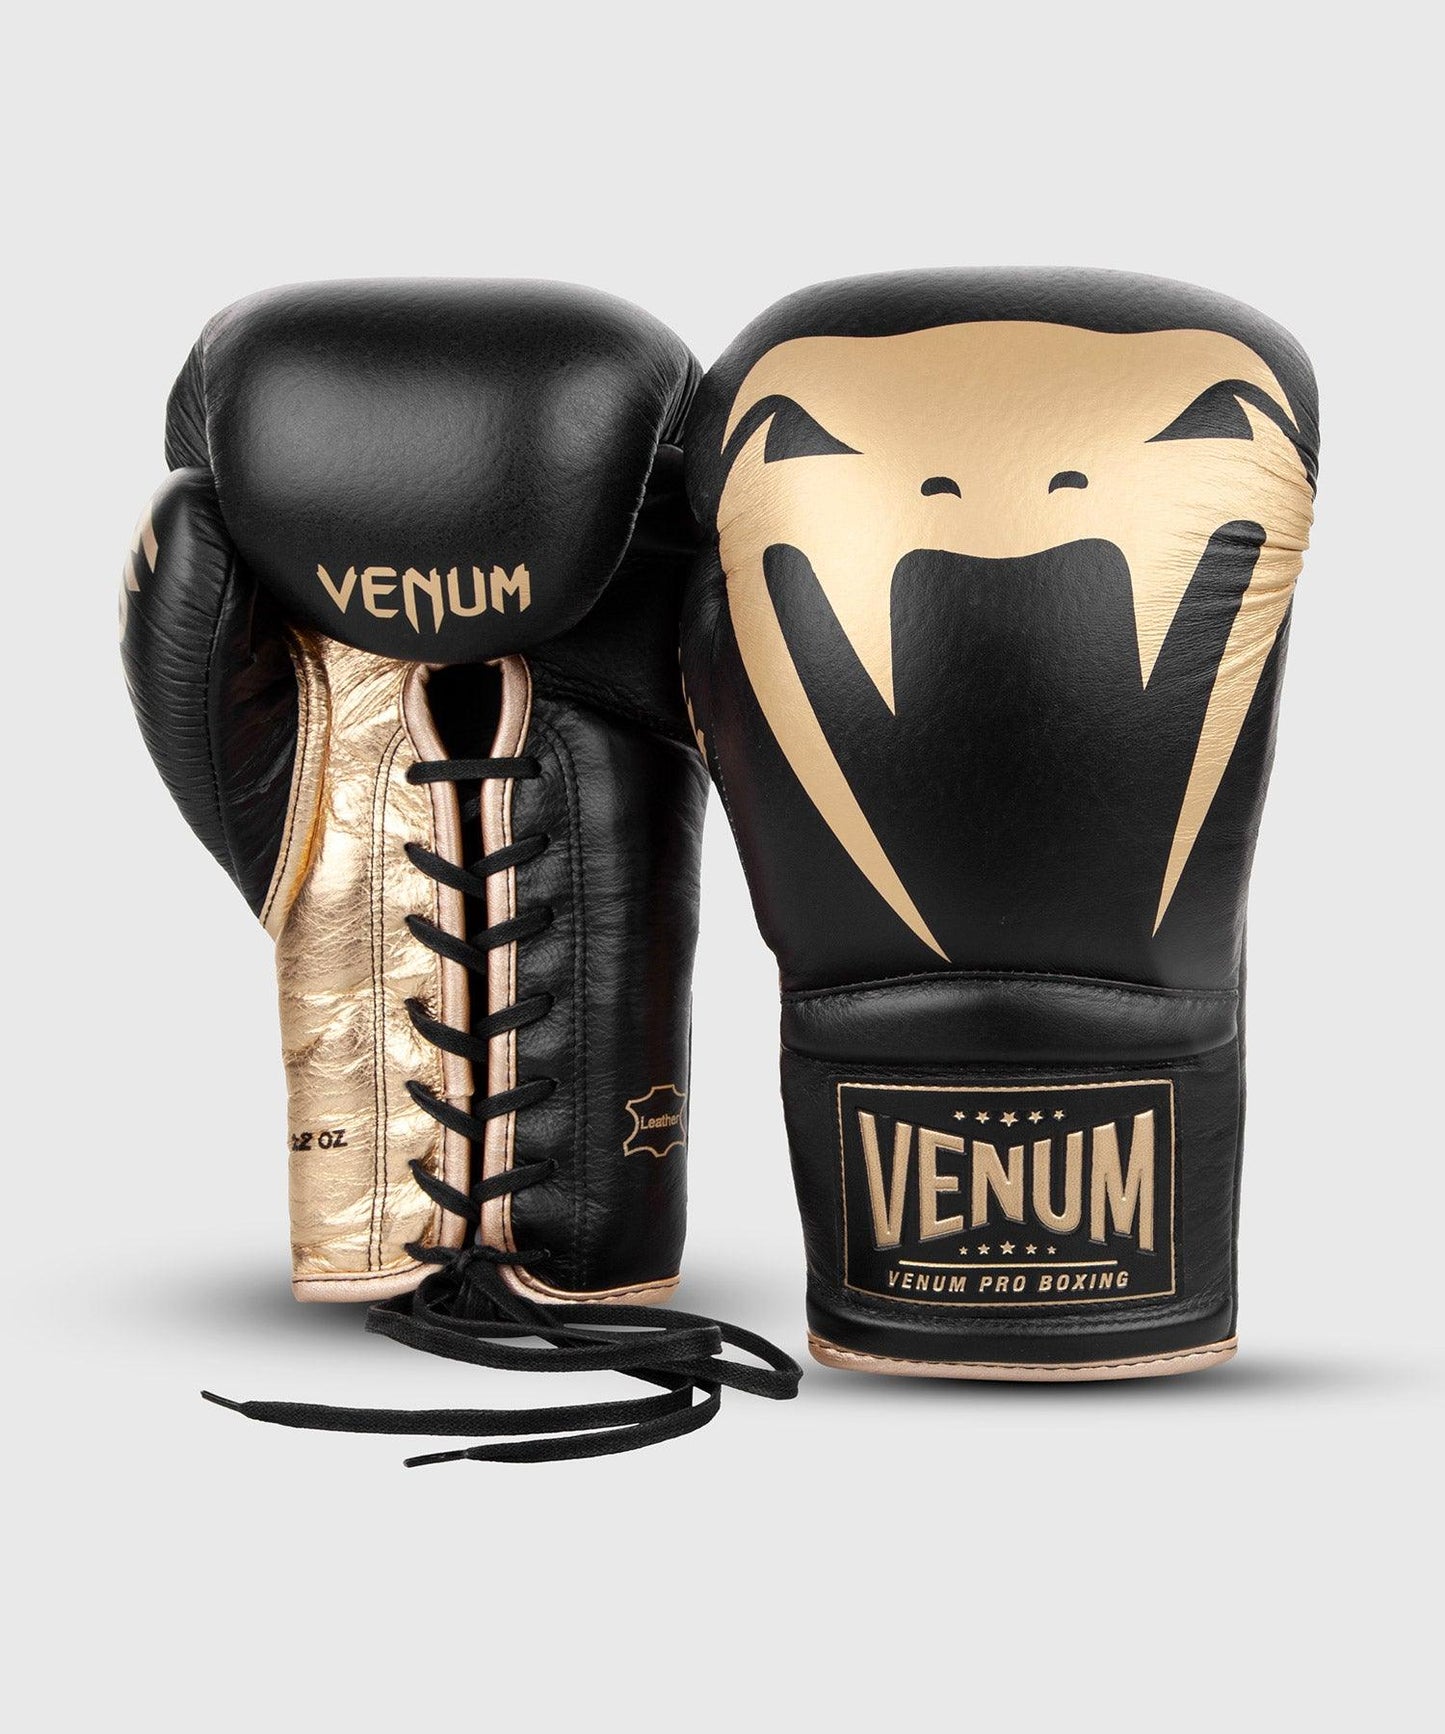 Venum Giant 2.0 Pro Boxing Gloves - With Laces - Black/Gold Picture 3